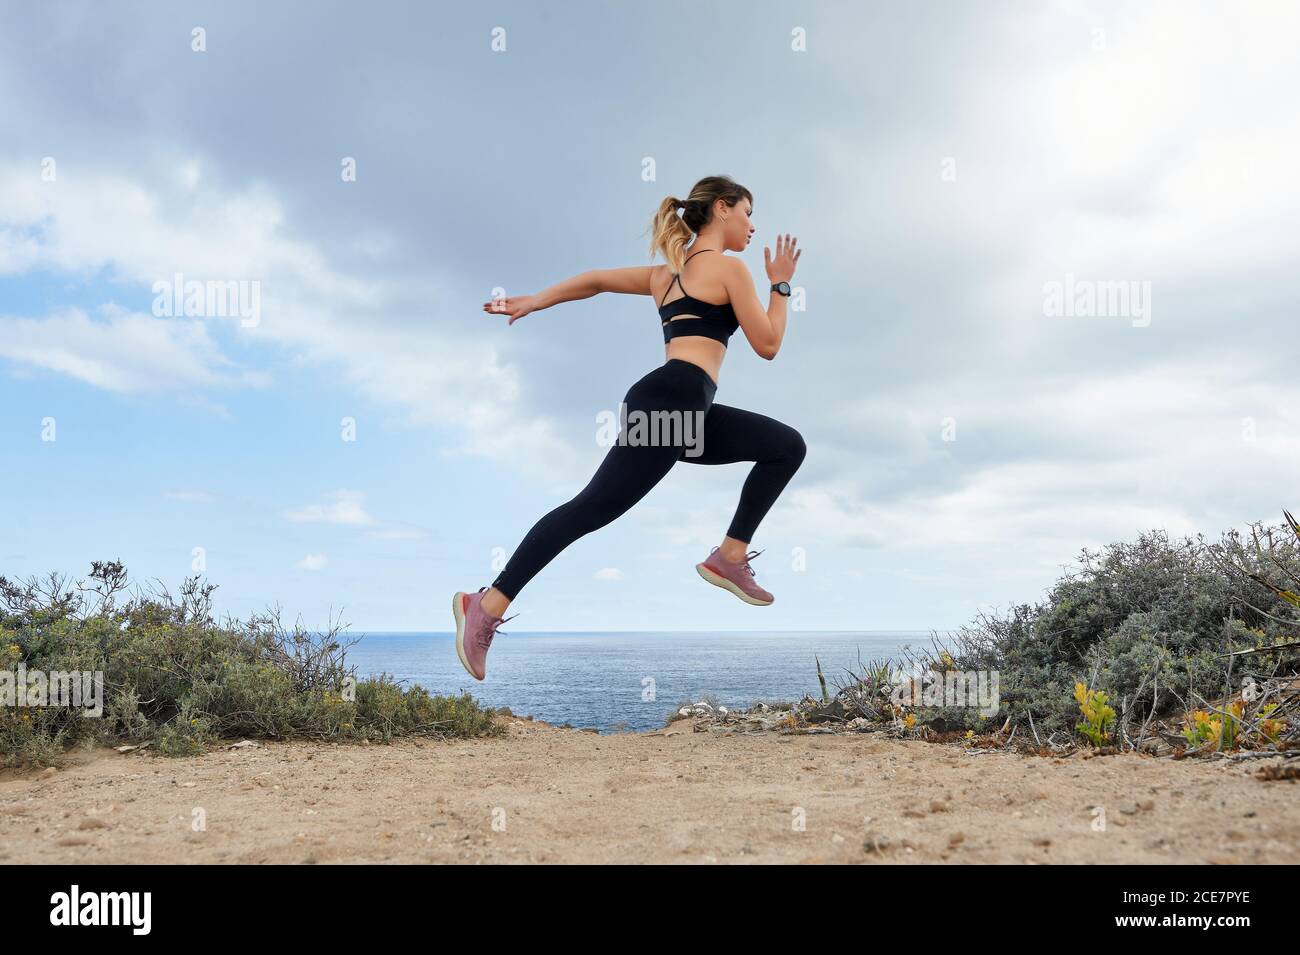 Side view full body slim determined female runner in black leggings and sports bra jogging and jumping on seashore against calm blue sea during sunny day Stock Photo